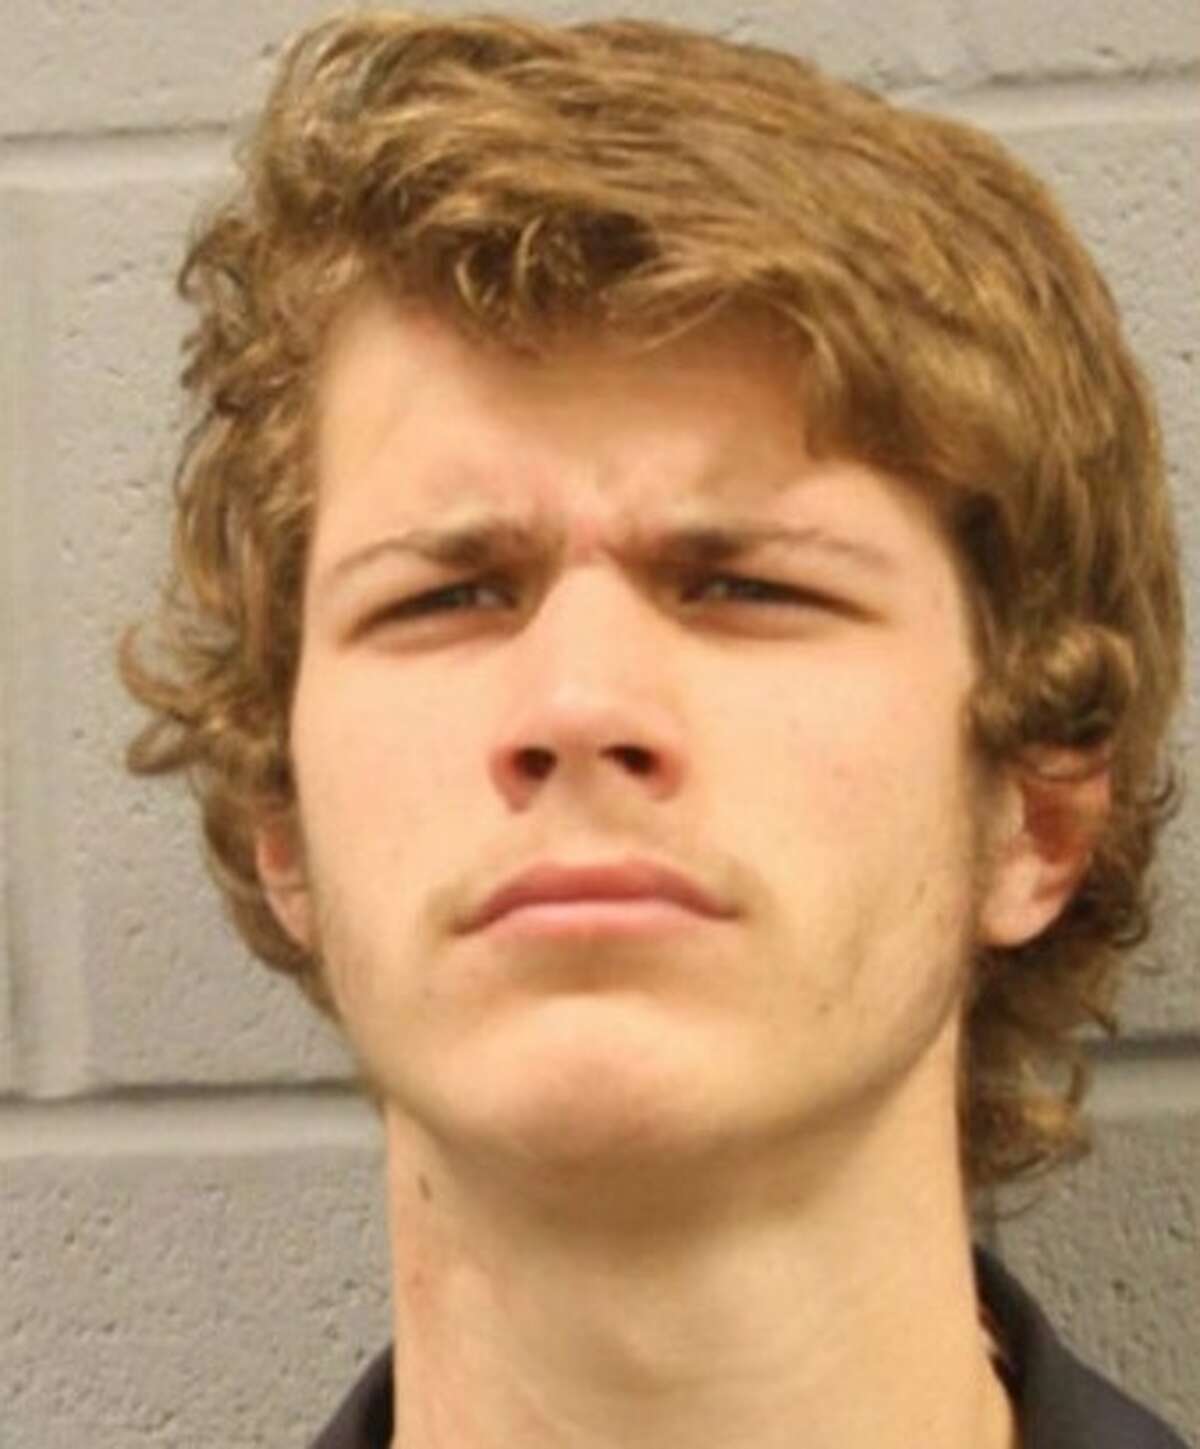 20-year-old Lucian Adrian Johnston was charged with two counts of aggravated assault with a deadly weapon, after allegedly stabbing two family members.